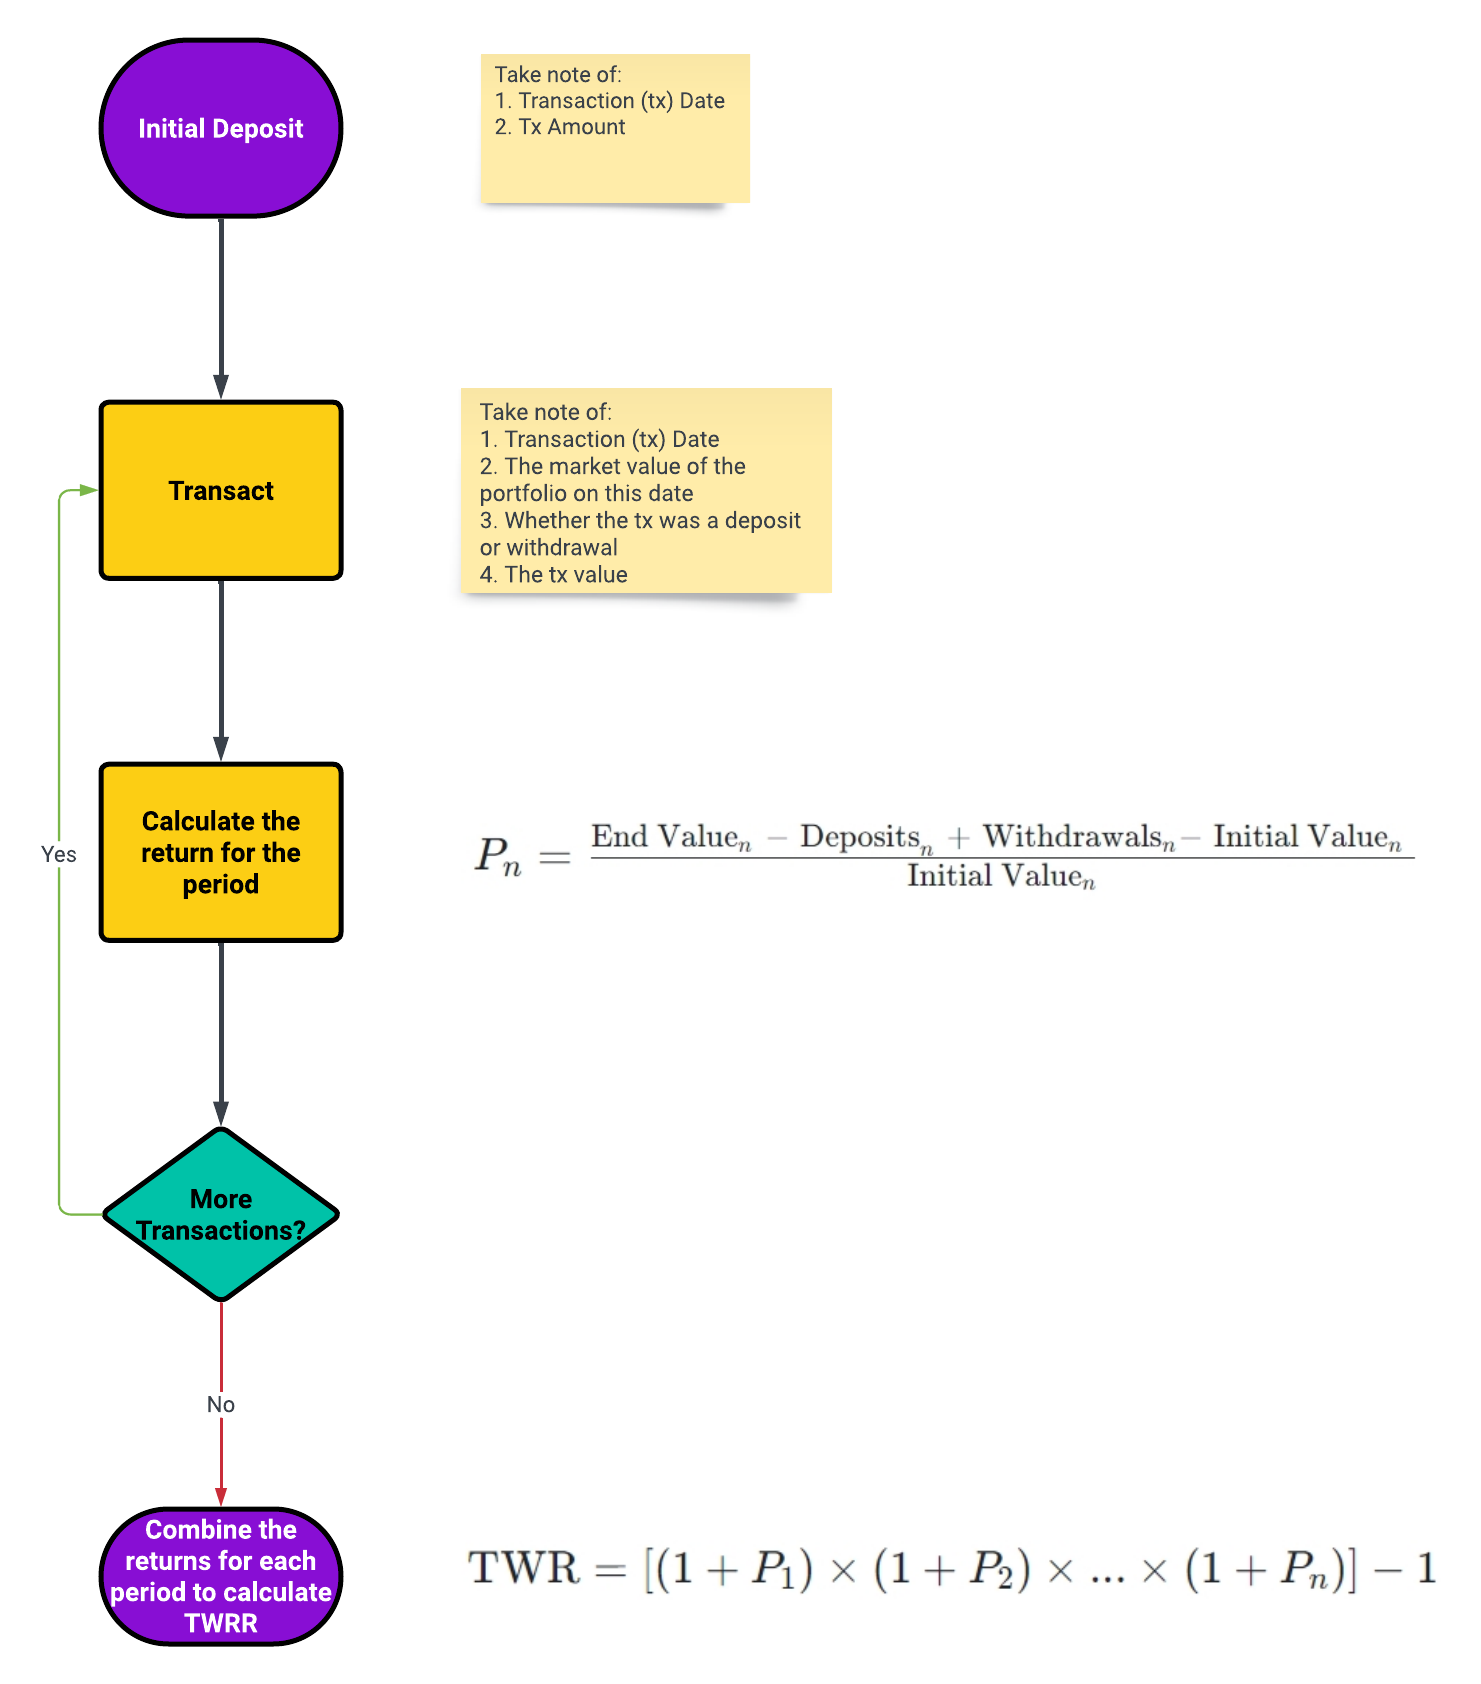 Flowchart showing the process to calculate the time-weighted rate of return